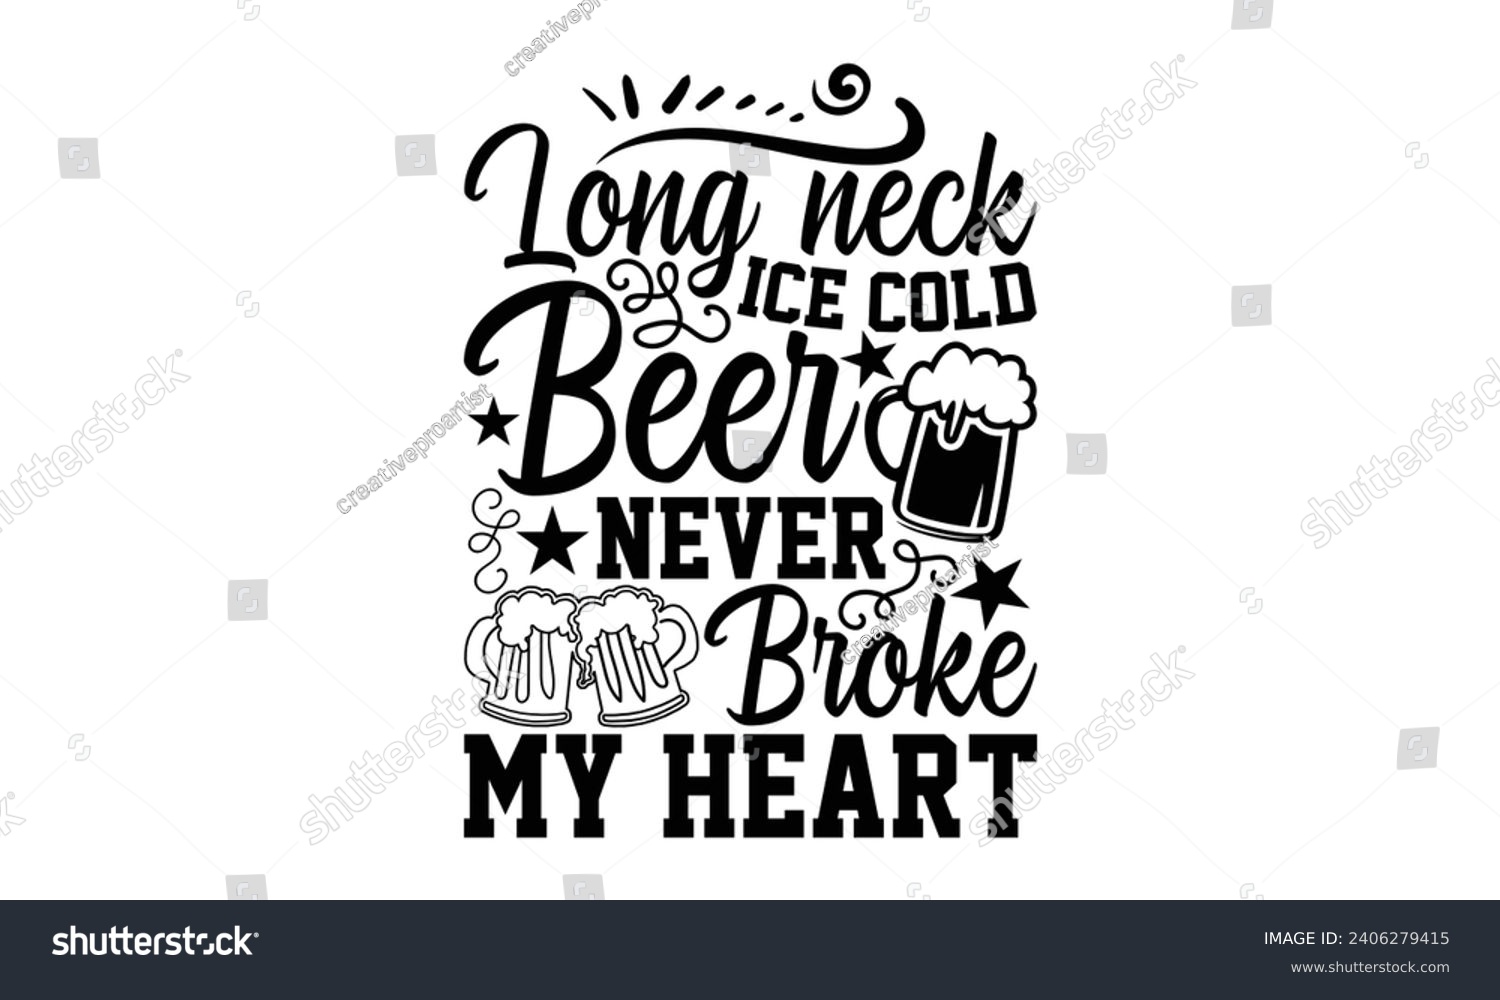 SVG of Long Neck Ice Cold Beer Never Broke My Heart- Beer t- shirt design, Handmade calligraphy vector illustration for Cutting Machine, Silhouette Cameo, Cricut, Vector illustration Template. svg